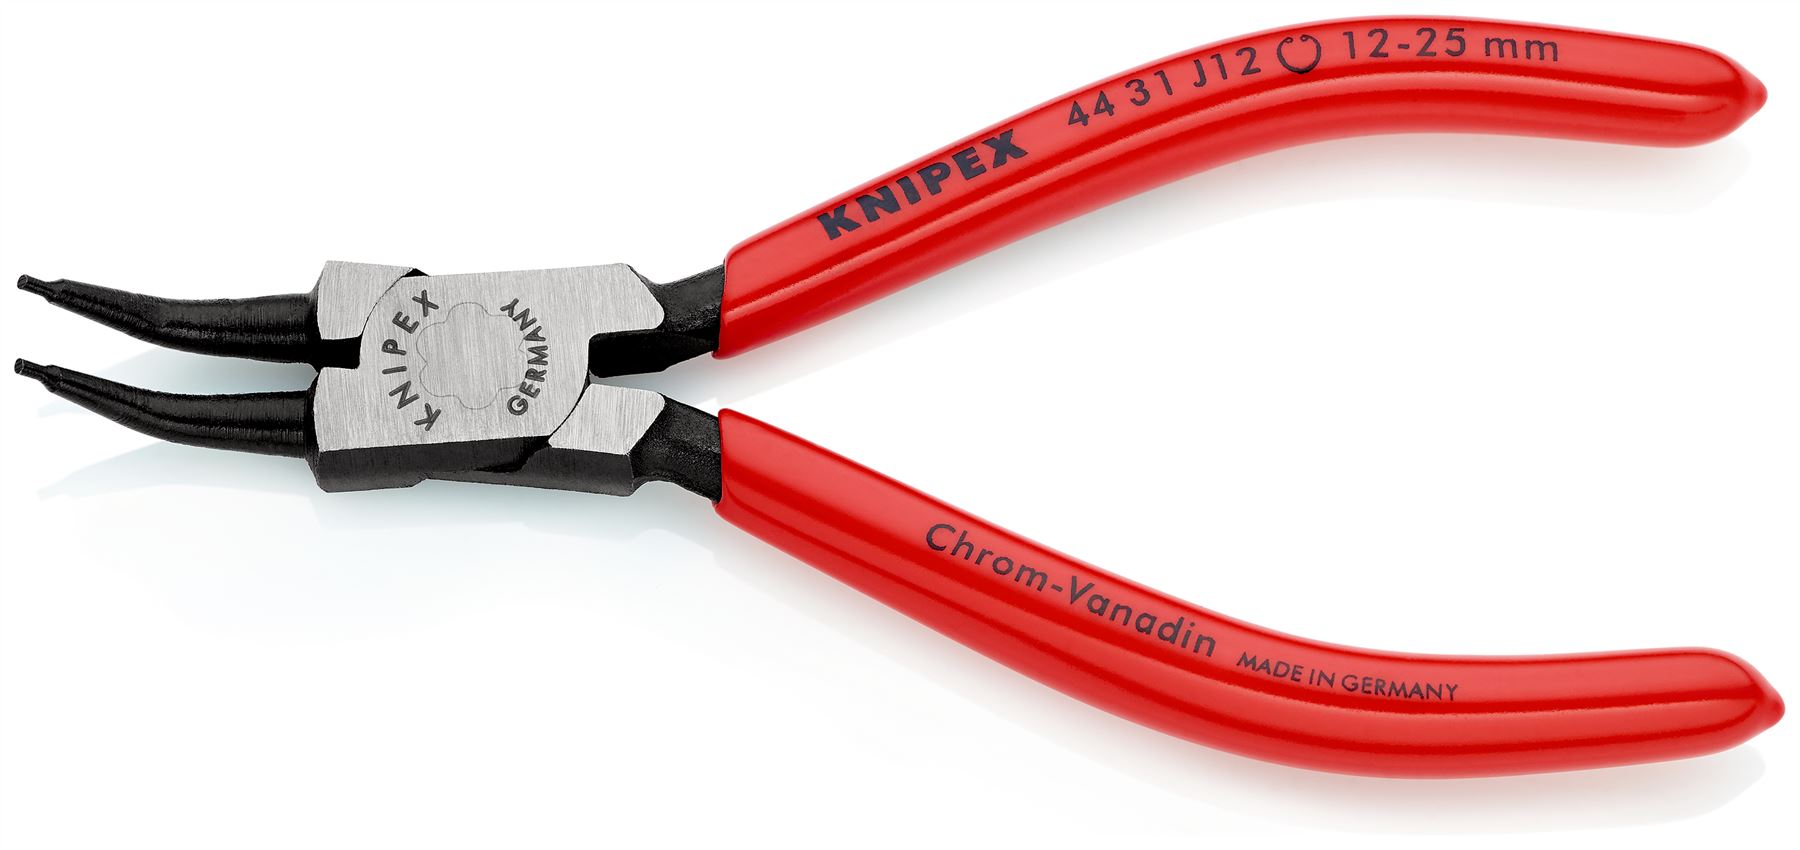 KNIPEX Circlip Pliers for Internal Circlips in Bore Holes 45° Angled 140mm 1.3mm Diameter Tips 44 31 J12